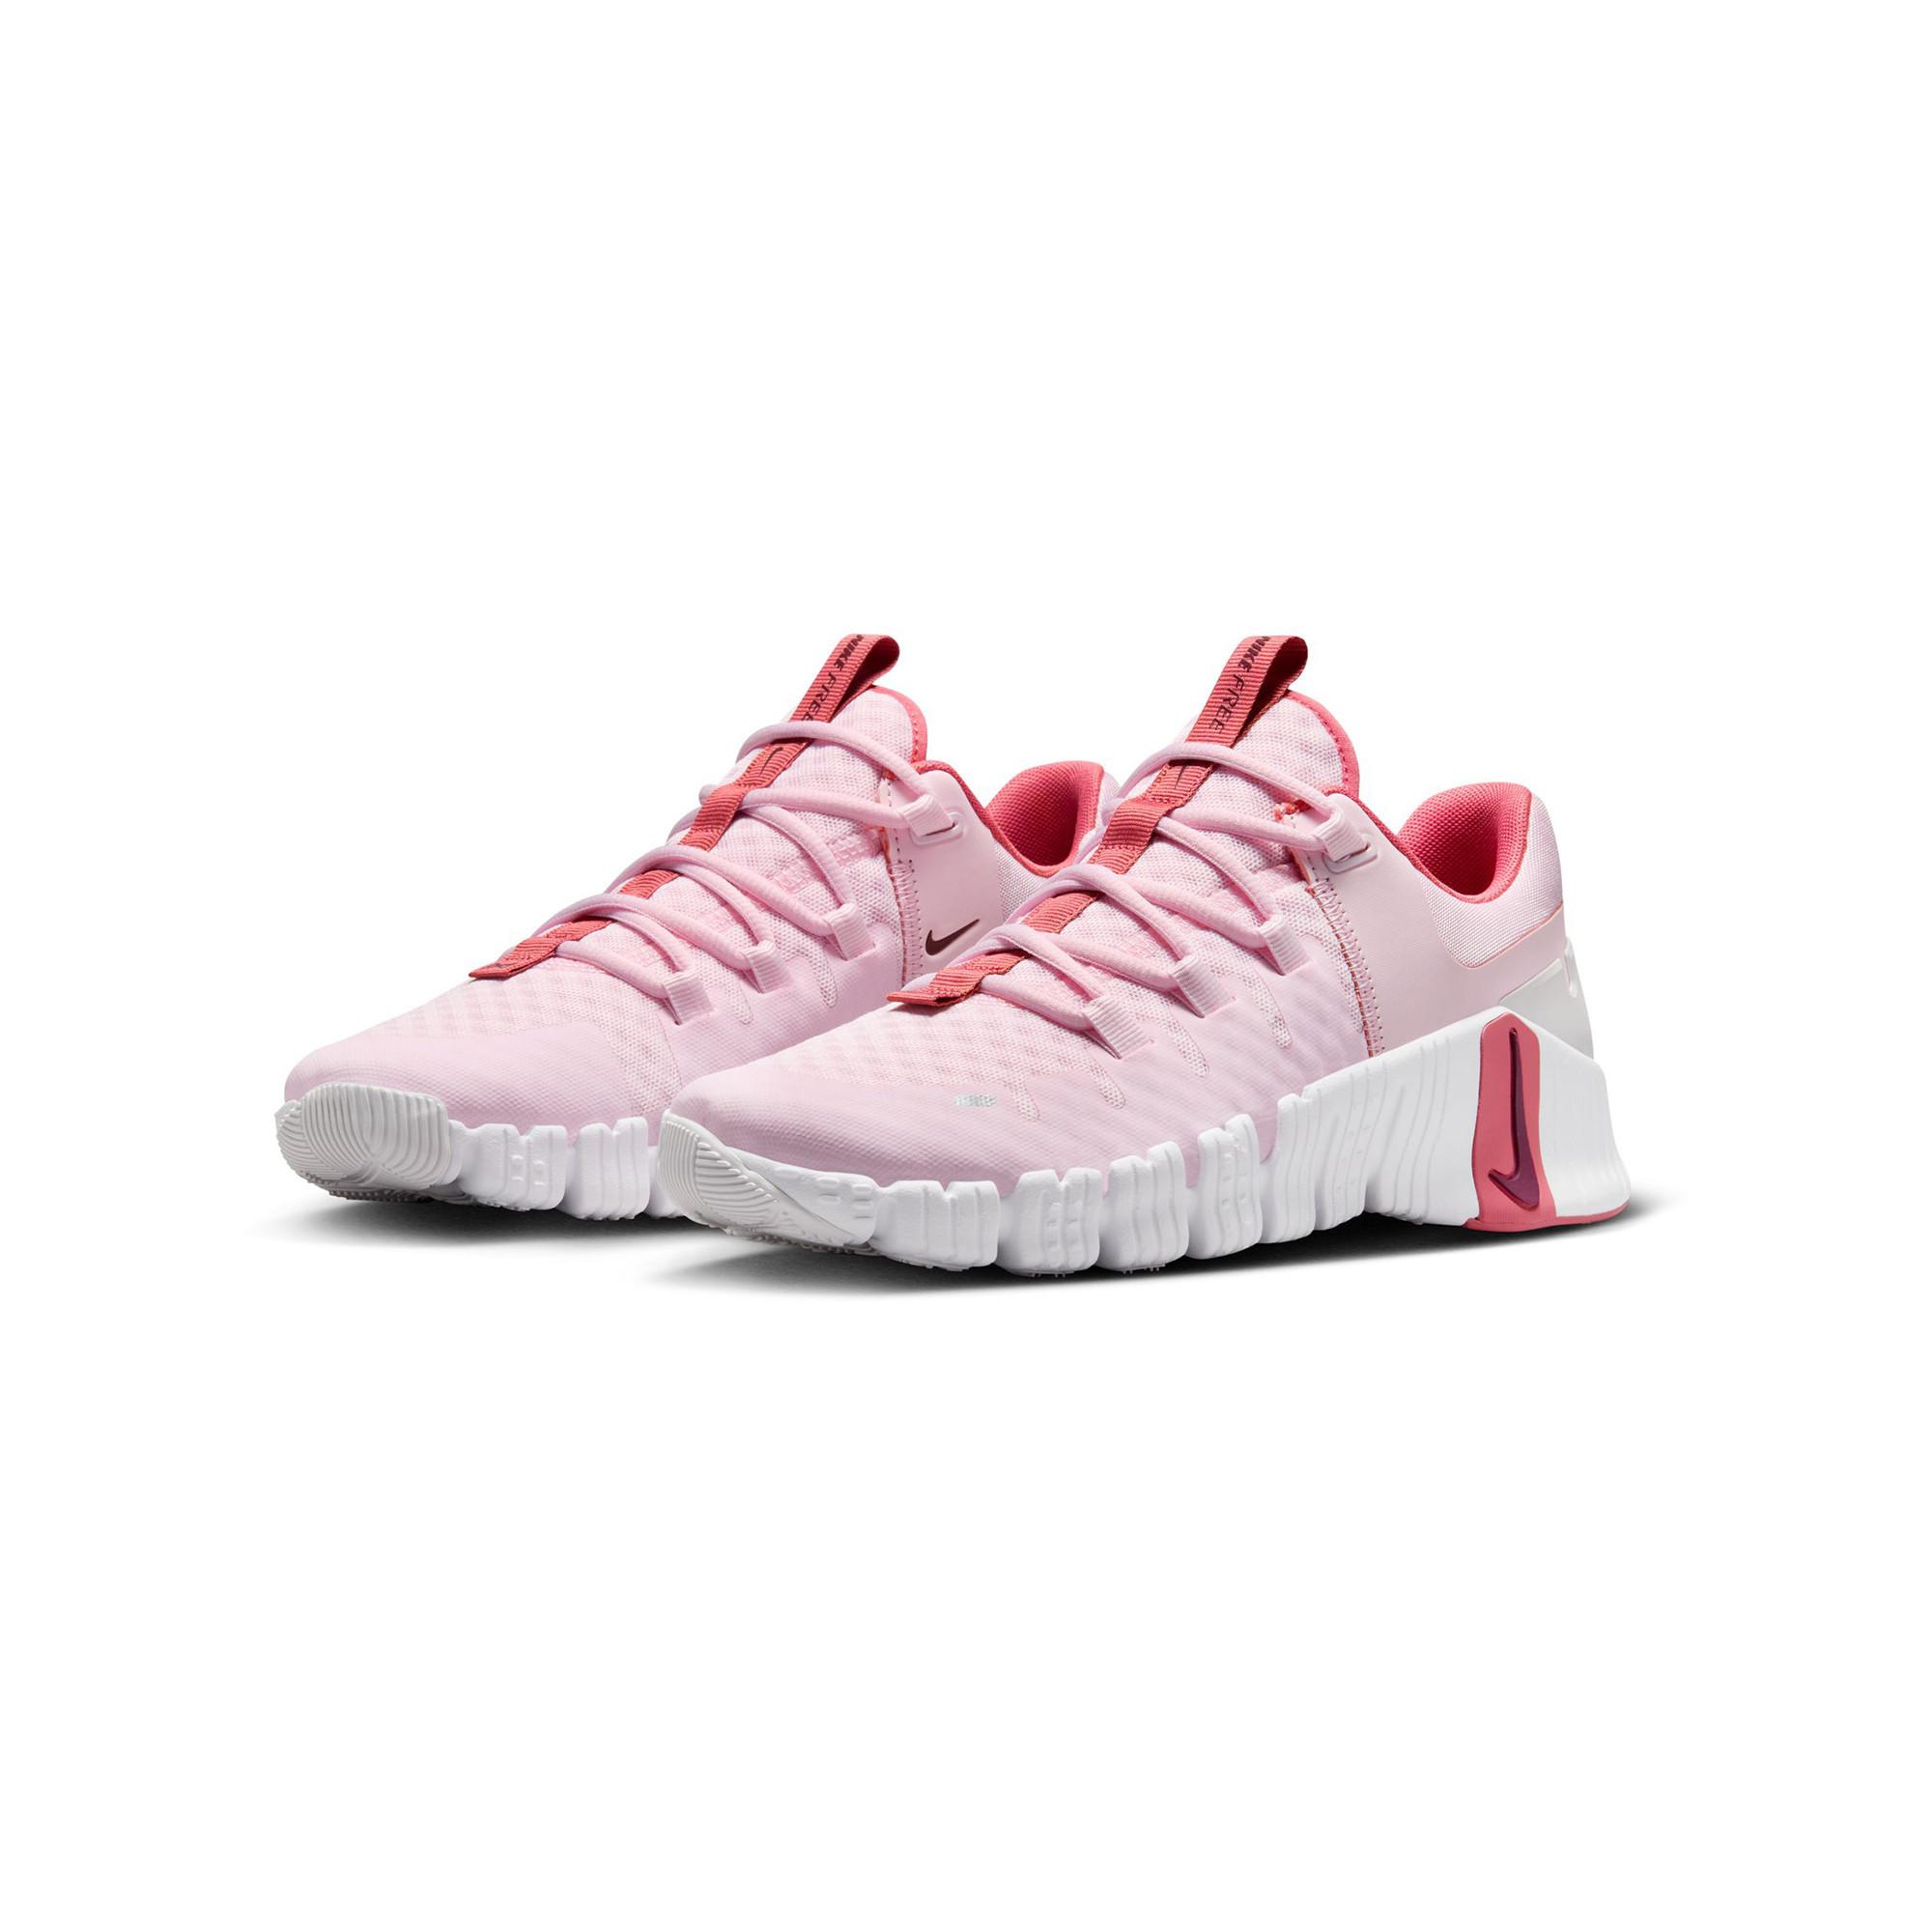 NIKE Wmns Free Metcon 5 Chaussures fitness 